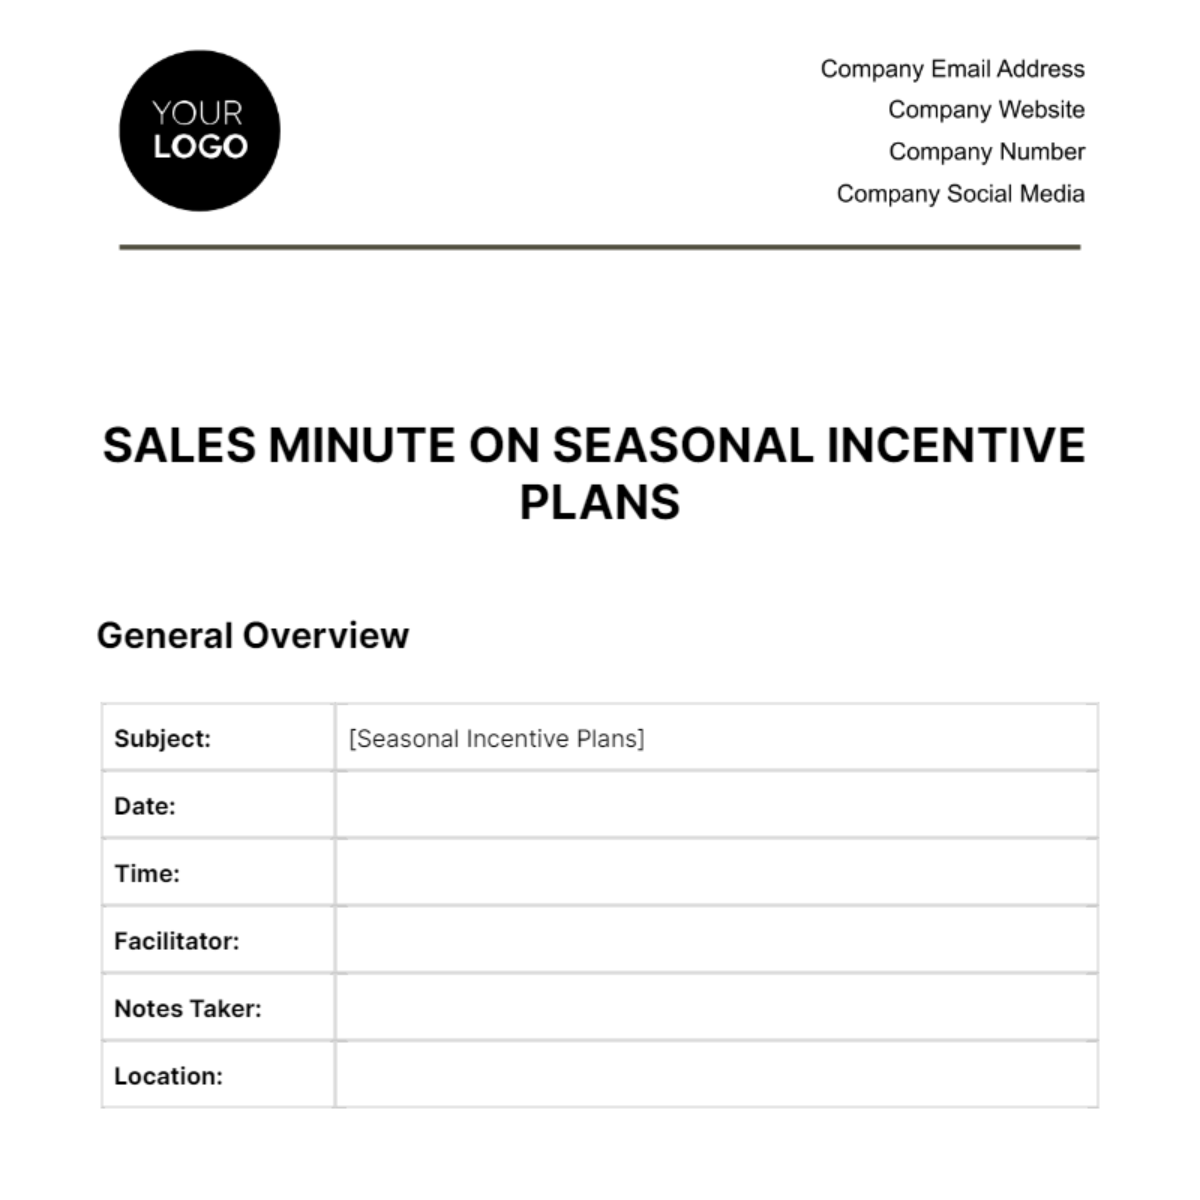 Free Sales Minute on Seasonal Incentive Plans Template